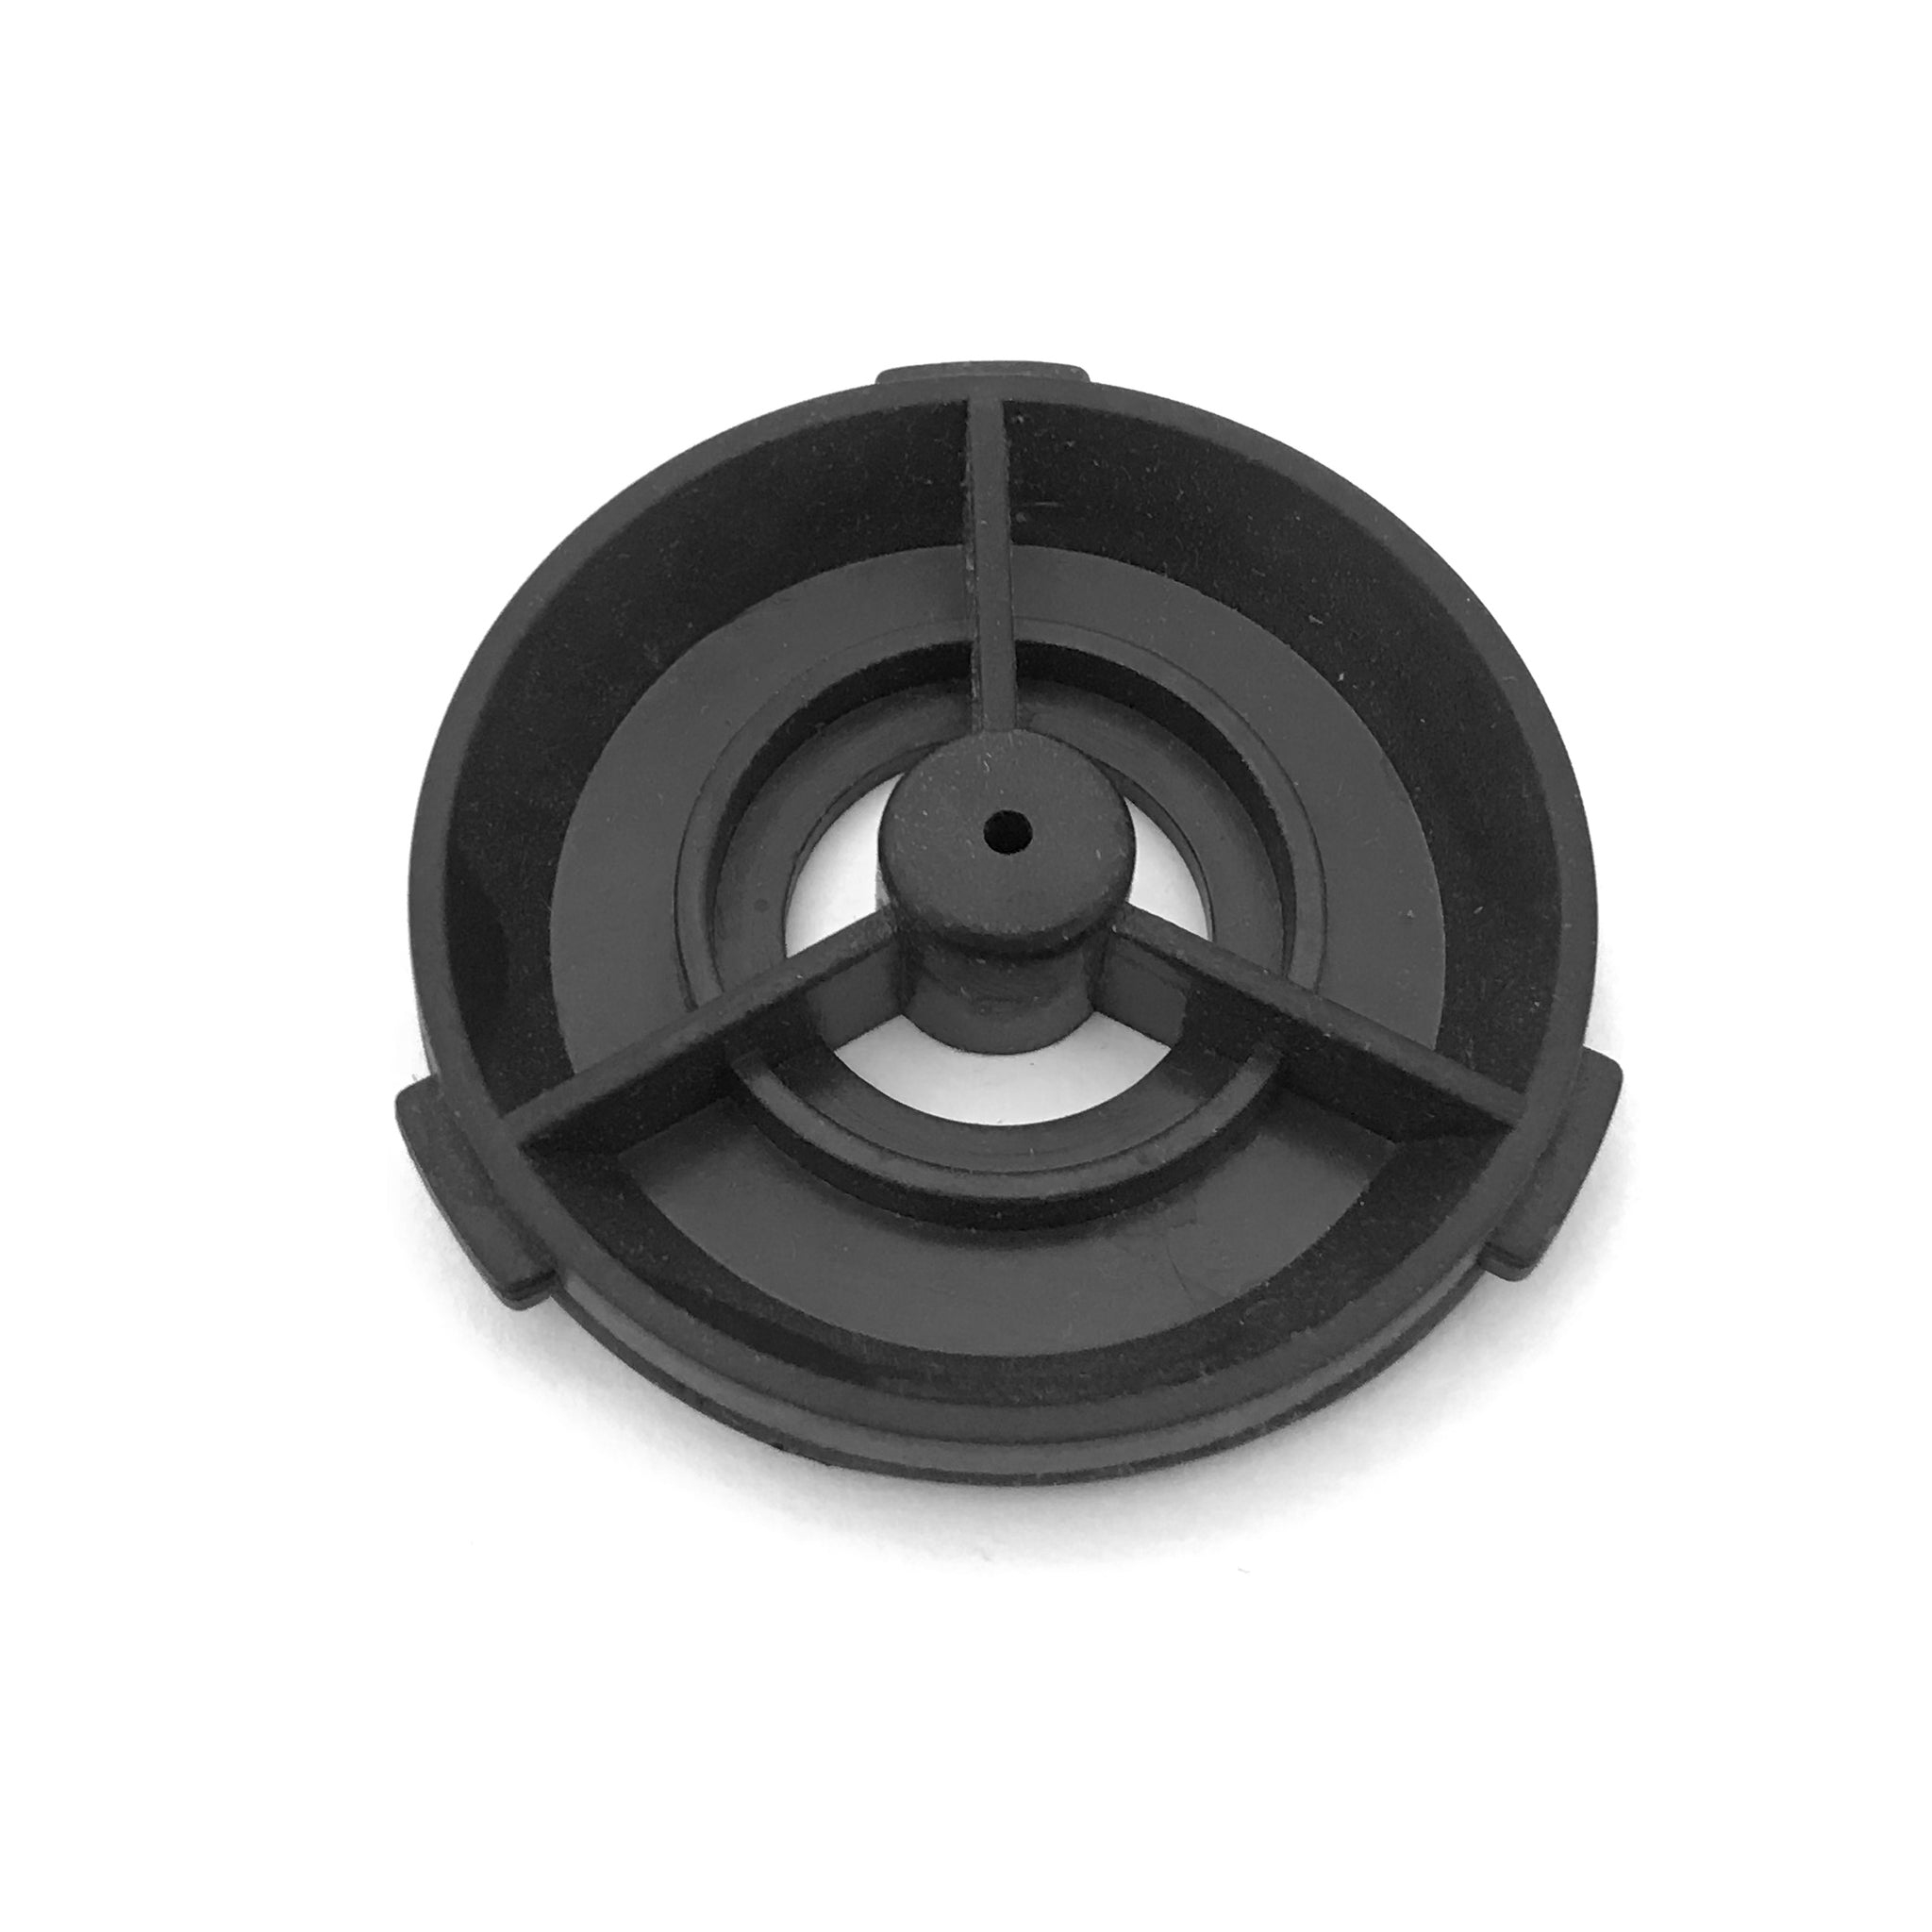 REPLACEMENT IMPELLER COVER & SEAL FOR SP-400